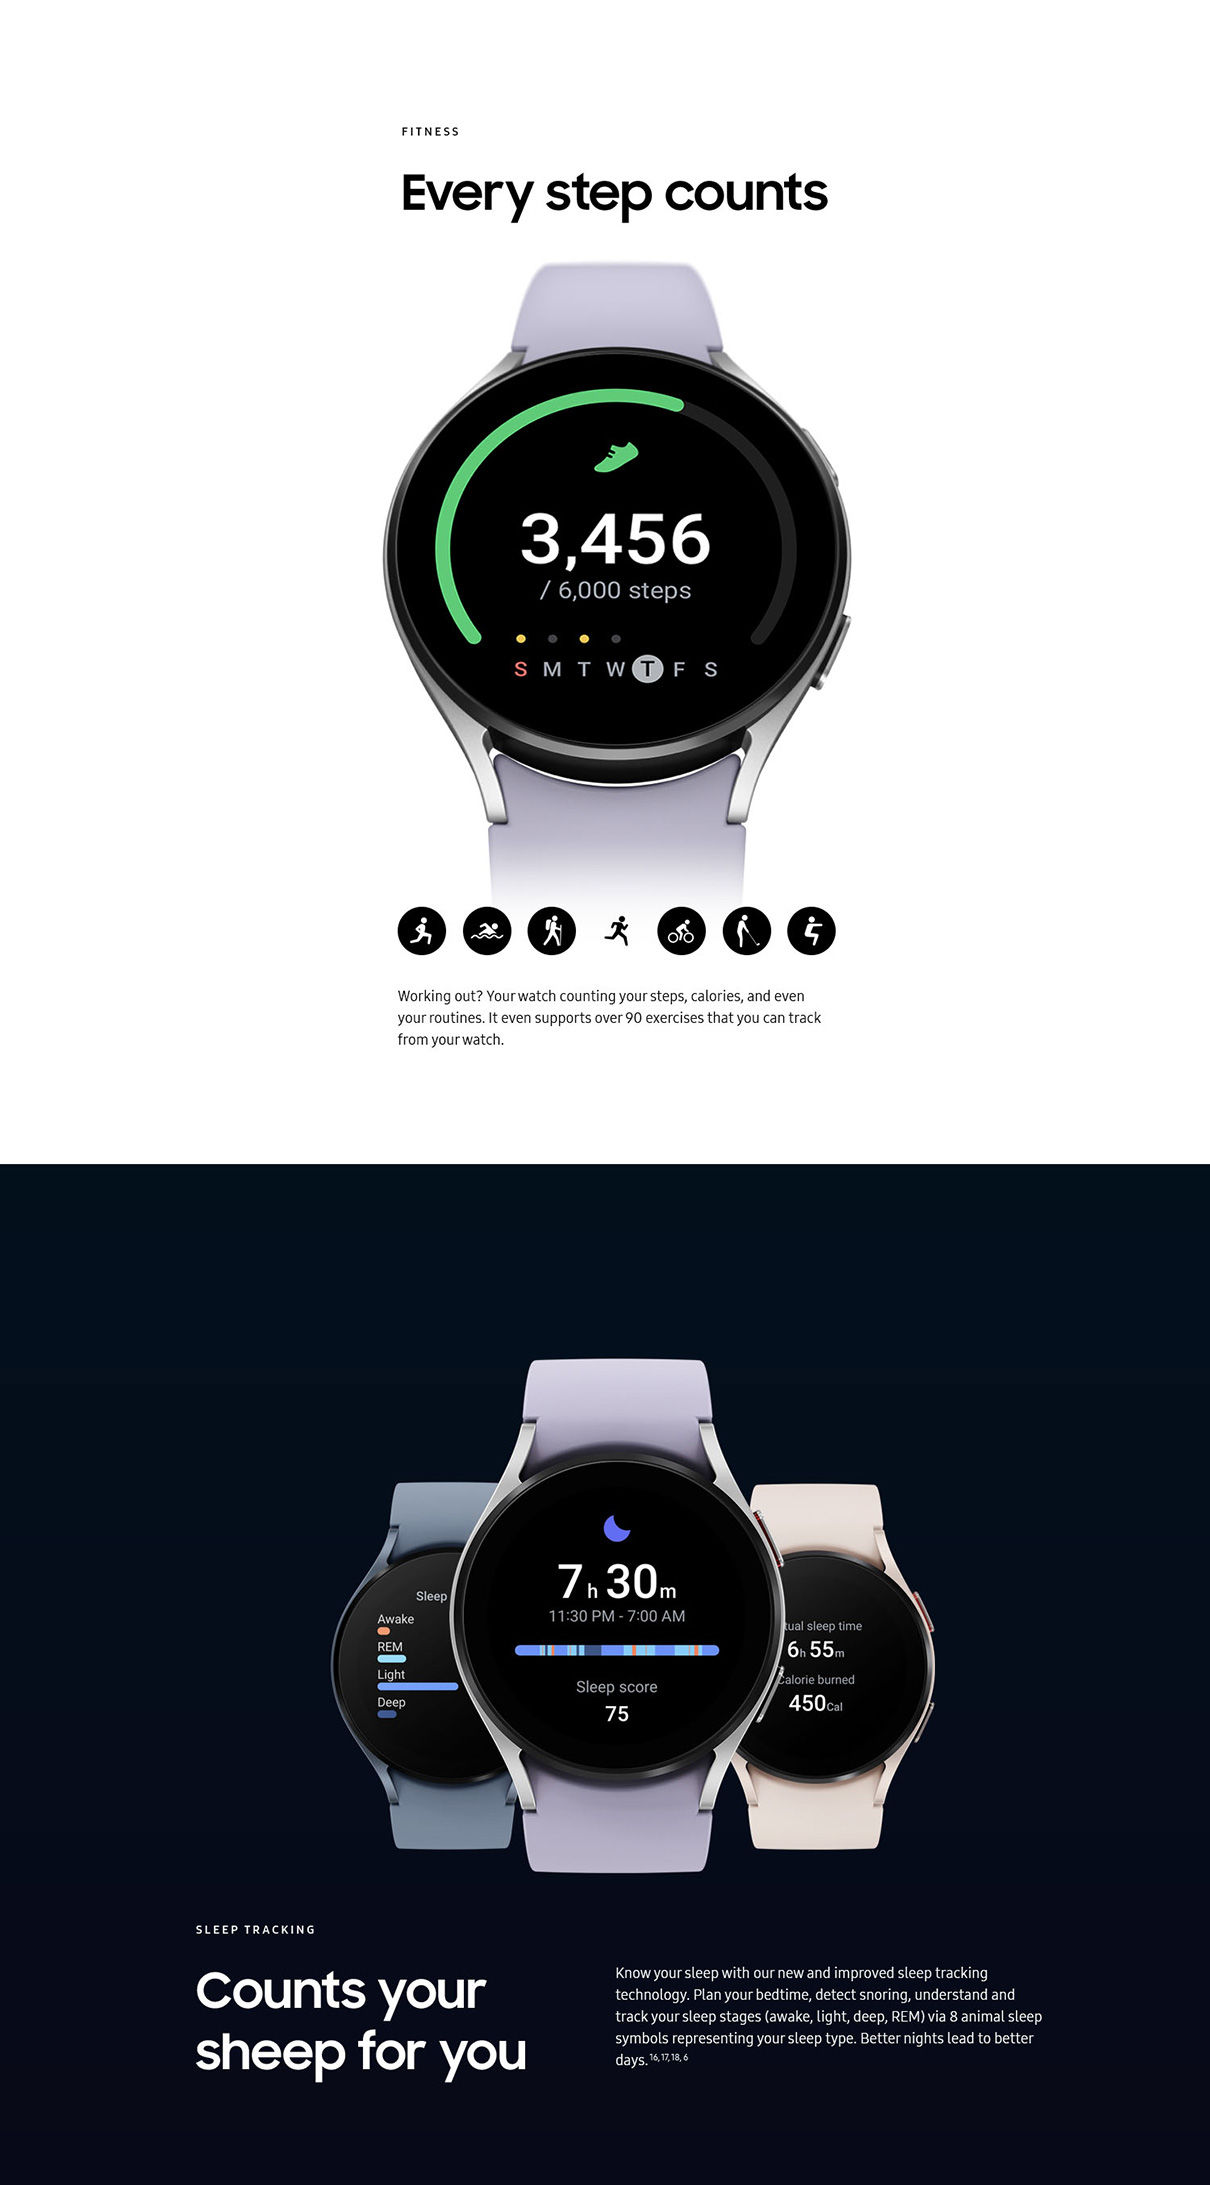 Samsung &Lt;H1 Class=&Quot;Heading-5 V-Fw-Regular&Quot;&Gt;Samsung Galaxy Watch5 Aluminum Smartwatch 40Mm Bt - Pink Gold&Lt;/H1&Gt; Https://Www.youtube.com/Watch?V=Jkj6F0Dmvvm Stay On Track, On Time, And In Style With Galaxy Watch5. Ready To Get A Better Understanding Of Your Wellness? Galaxy Watch5 Features Body Composition Analysis, Improved Sensors That Get An Accurate Read On Your Heart Rate And Advanced Sleep Coaching That Helps You Get Your Zzzs . Whether You’re Getting Your Steps In, Jogging At Lunchtime Or Crushing Yoga Class On The Weekend, Strut Your Fashion Sense With Watch Bands And Faces That Match Your Awesome Outfit. Stay Powered Up On The Go Throughout Even Your Busiest Day With An Improved Battery That Gives You Time To Do It All. Worry Less And Do More And With A Sapphire Crystal Glass That’s More Durable Than Before And A Water Resistant Design That Can Take A Splash Or Two. Go Ahead, Unleash The Best You With Galaxy Watch5 &Nbsp; &Lt;Figure Class=&Quot;Wpb_Wrapper Vc_Figure&Quot; Style=&Quot;Box-Sizing: Border-Box; Display: Inline-Block; Margin: 0Px; Vertical-Align: Top; Max-Width: 100%;&Quot;&Gt; &Lt;Div Class=&Quot;Vc_Single_Image-Wrapper Vc_Box_Border_Grey&Quot; Style=&Quot;Box-Sizing: Border-Box; Display: Inline-Block; Vertical-Align: Top; Max-Width: 100%; Margin-Bottom: 0Px;&Quot;&Gt;&Lt;Span Style=&Quot;Color: #333333; Font-Family: Georgia, 'Times New Roman', 'Bitstream Charter', Times, Serif; Font-Size: 16Px; Font-Weight: Bold; Letter-Spacing: -0.14Px;&Quot;&Gt;We Also Provide International Wholesale And Retail Shipping To All Gcc Countries: Saudi Arabia, Qatar, Oman, Kuwait, Bahrain.&Lt;/Span&Gt;&Lt;/Div&Gt;&Lt;/Figure&Gt; &Lt;A Href=&Quot;Http://Lablaab.com&Quot;&Gt;More Products&Lt;/A&Gt;&Lt;Span Style=&Quot;Color: #7D7D7D; Font-Family: Inter, Open Sans, Helveticaneue-Light, Helvetica Neue Light, Helvetica Neue, Helvetica, Arial, Lucida Grande, Sans-Serif;&Quot;&Gt;&Lt;Span Style=&Quot;Font-Size: 14Px; Letter-Spacing: -0.14Px;&Quot;&Gt; &Lt;/Span&Gt;&Lt;/Span&Gt; Samsung Galaxy Watch5 Samsung Galaxy Watch5 Aluminum Smartwatch 40Mm Bt - Pink Gold